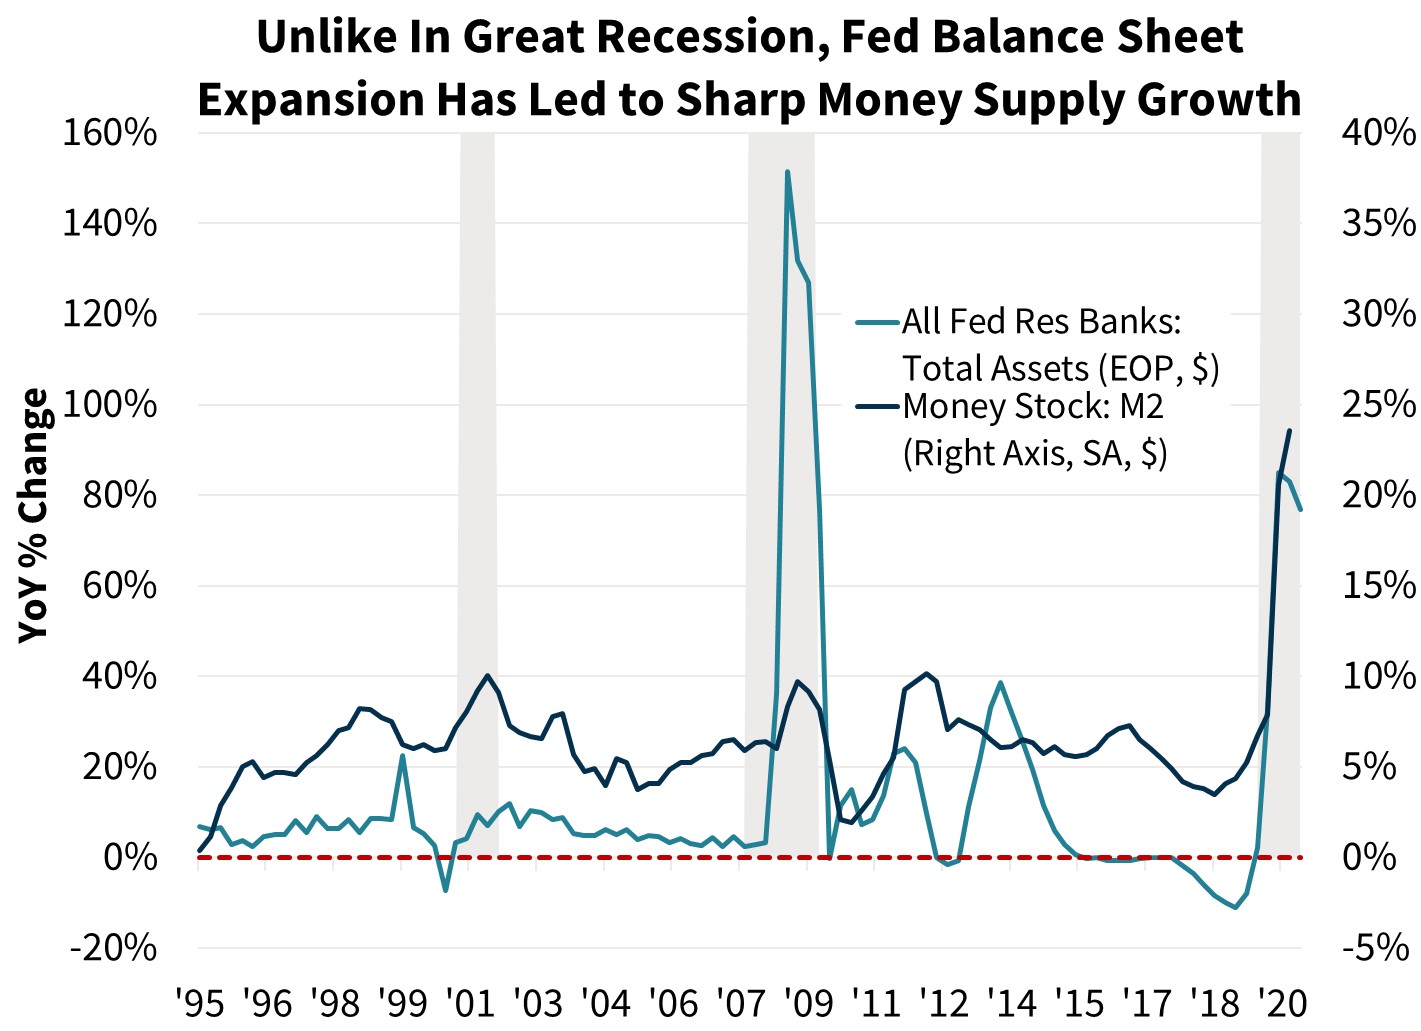  Unlike In Great Recession, Fed Balance Sheet Expansion Has led to Sharp Money Supply Growth
